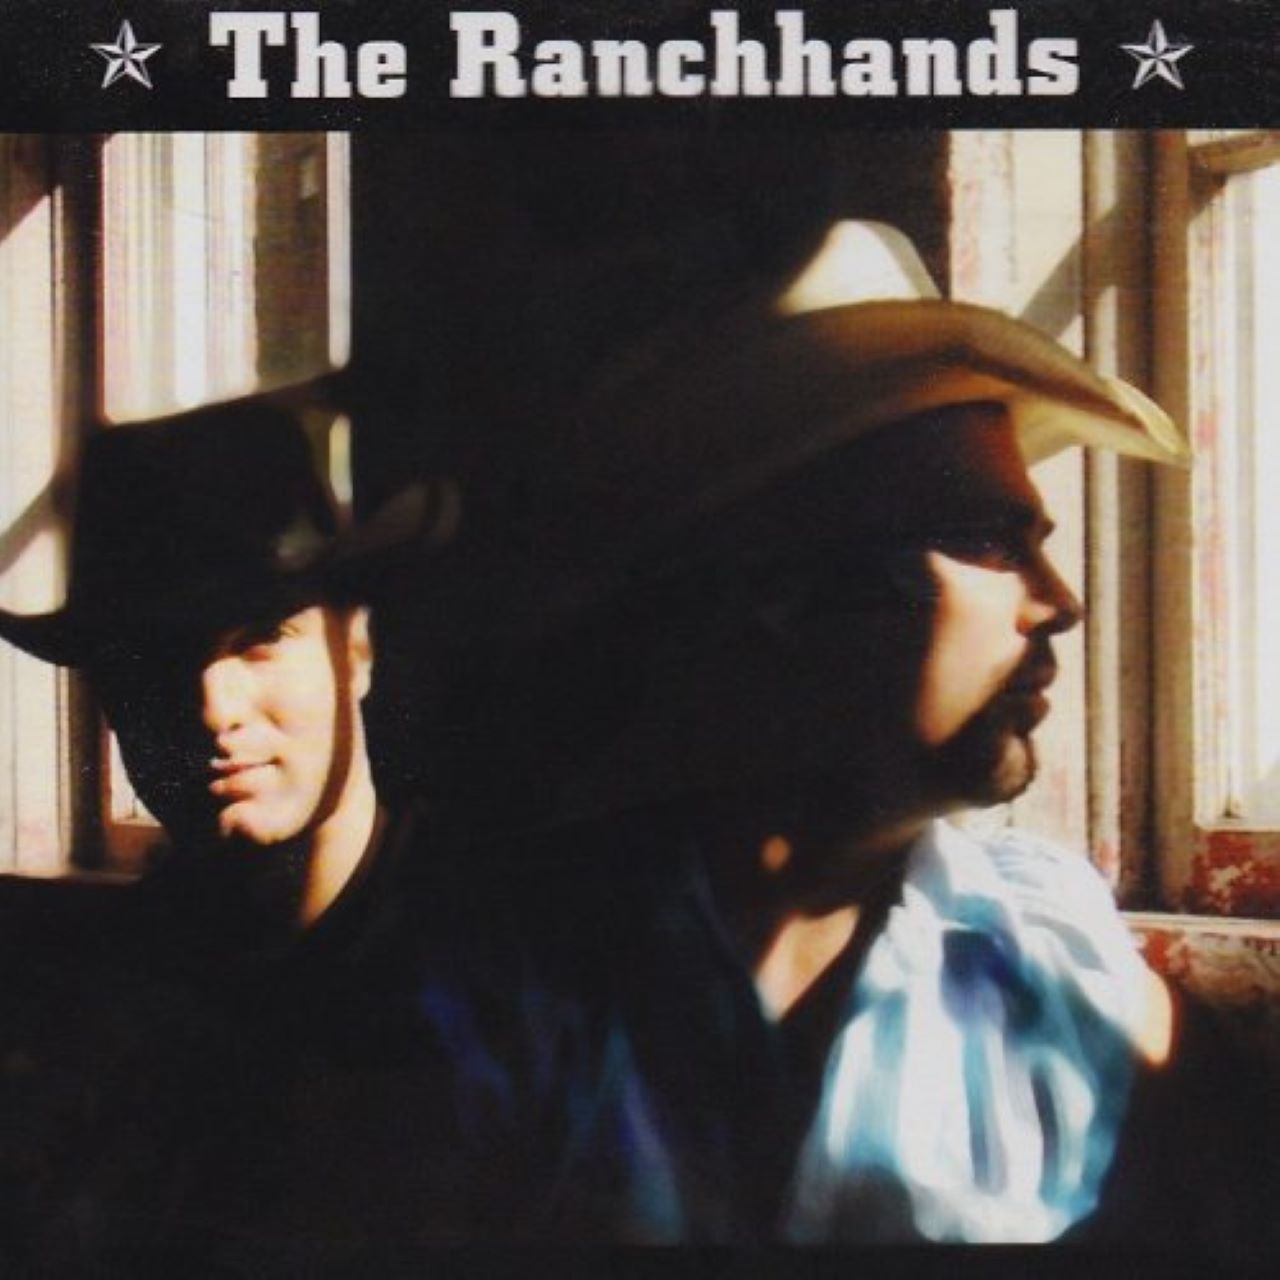 Ranchhands - The Ranchhands covewr album